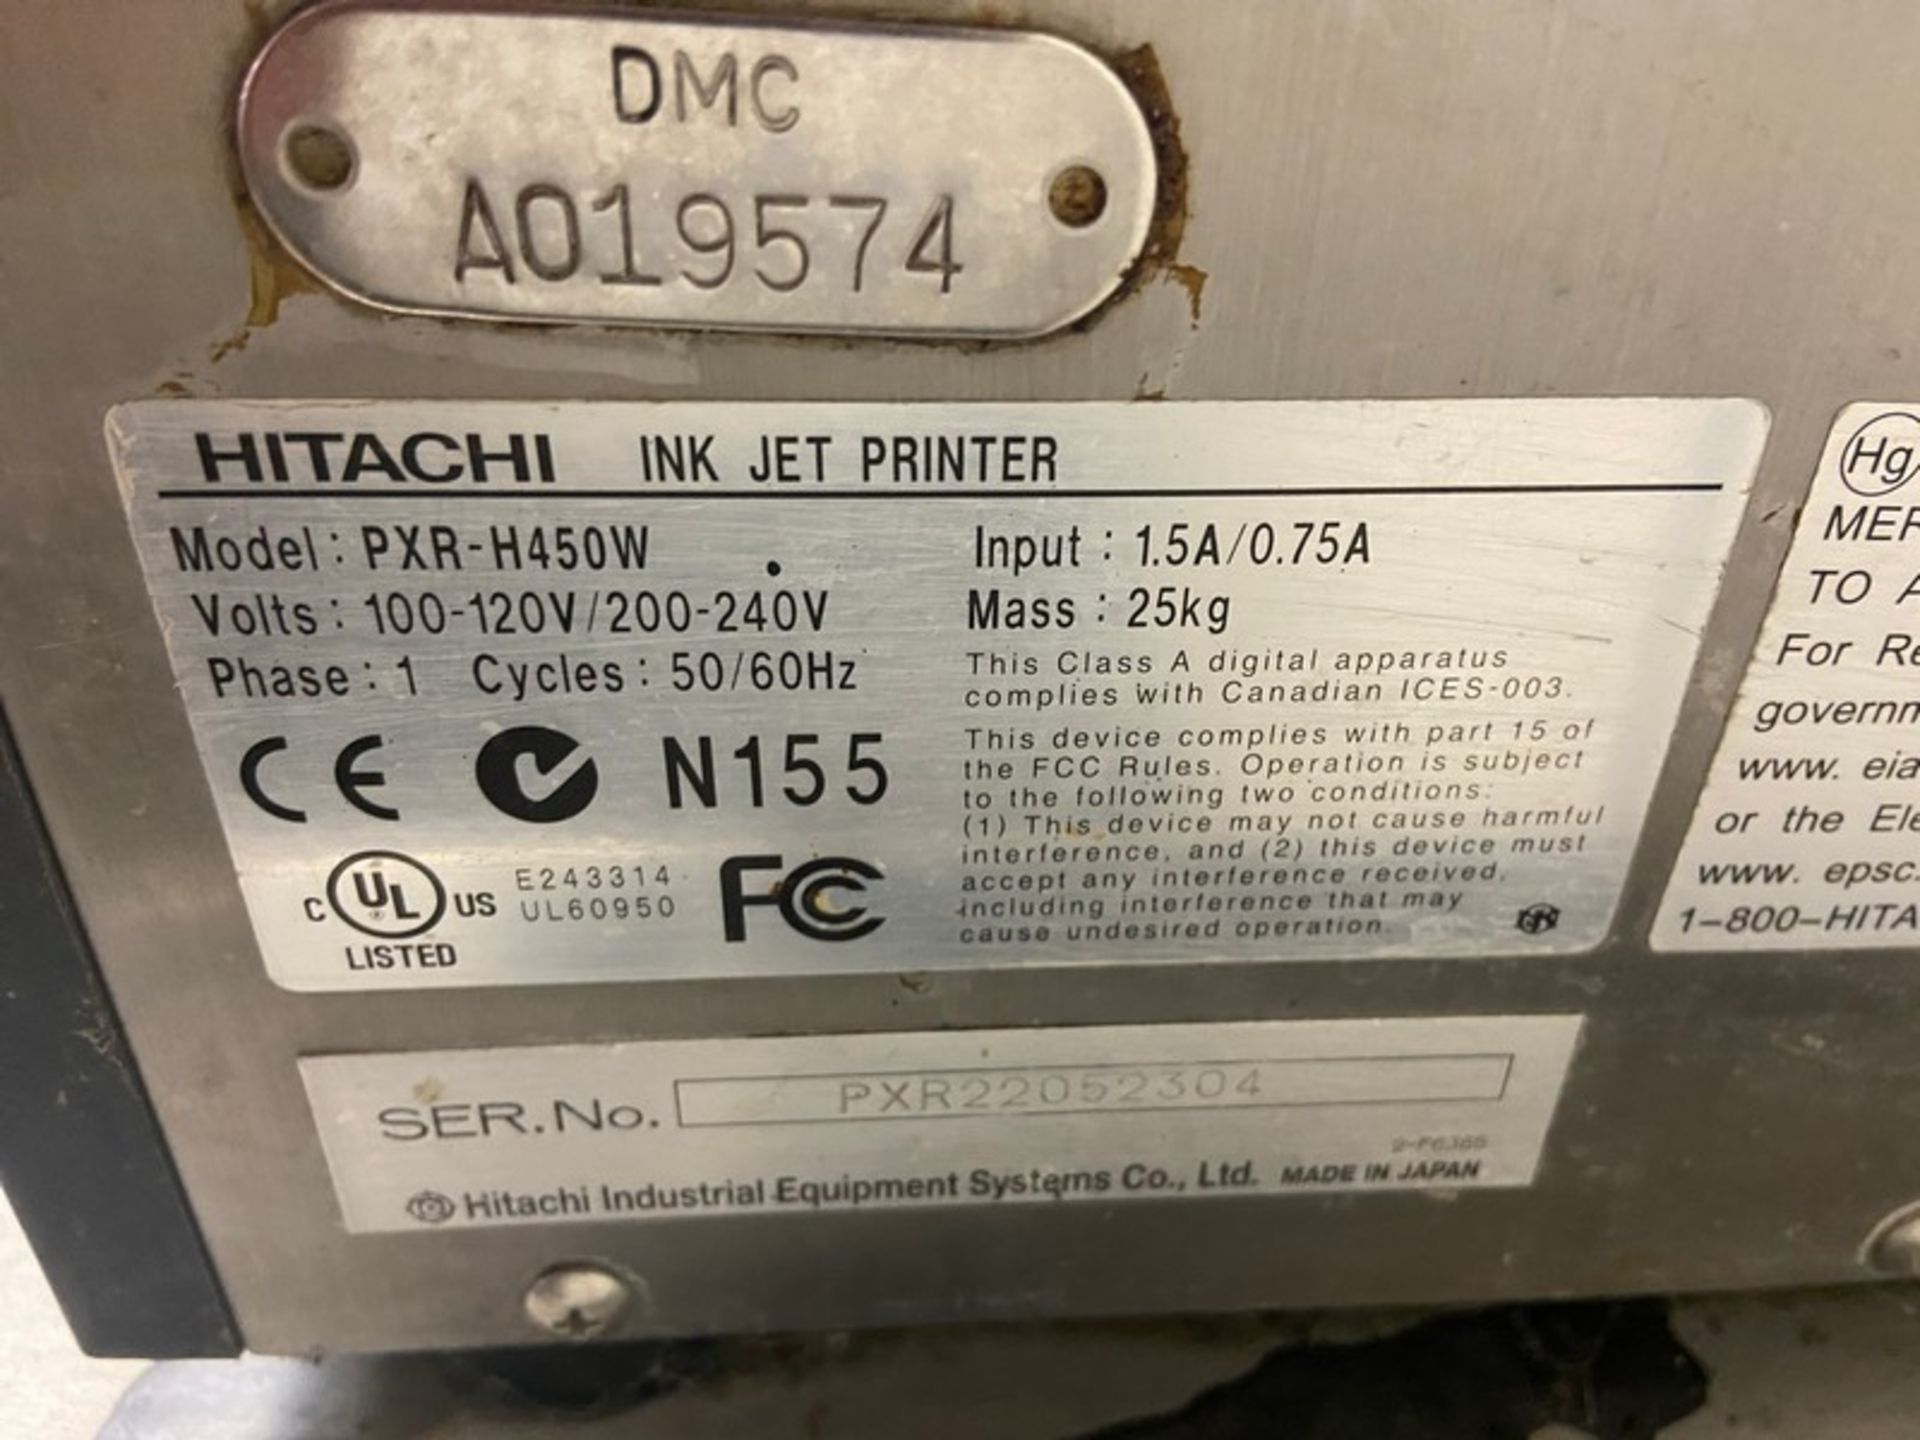 HITACHI Ink Jet Printer, M/N PXR-H450W, S/N PXR22052304, 100-120/200-240 Volts, 1 Phase, with Ink - Image 4 of 5